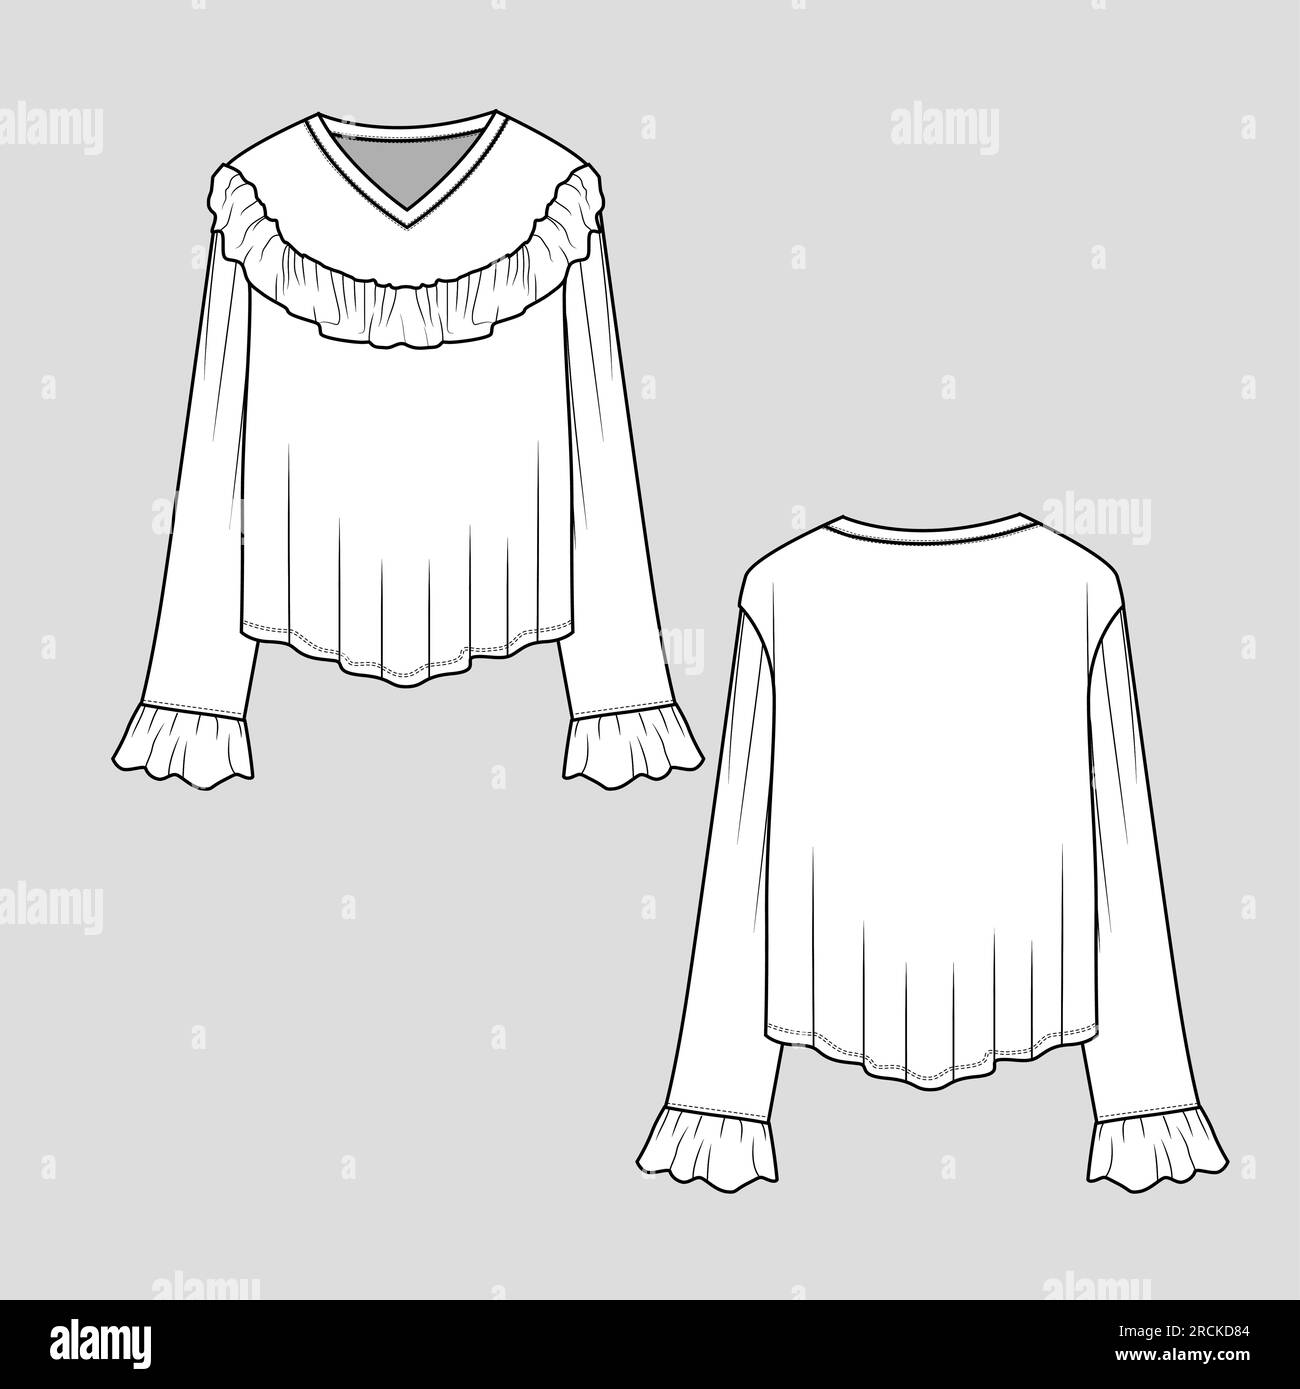 Blouse Technical Drawing Vector Images (over 3,900)